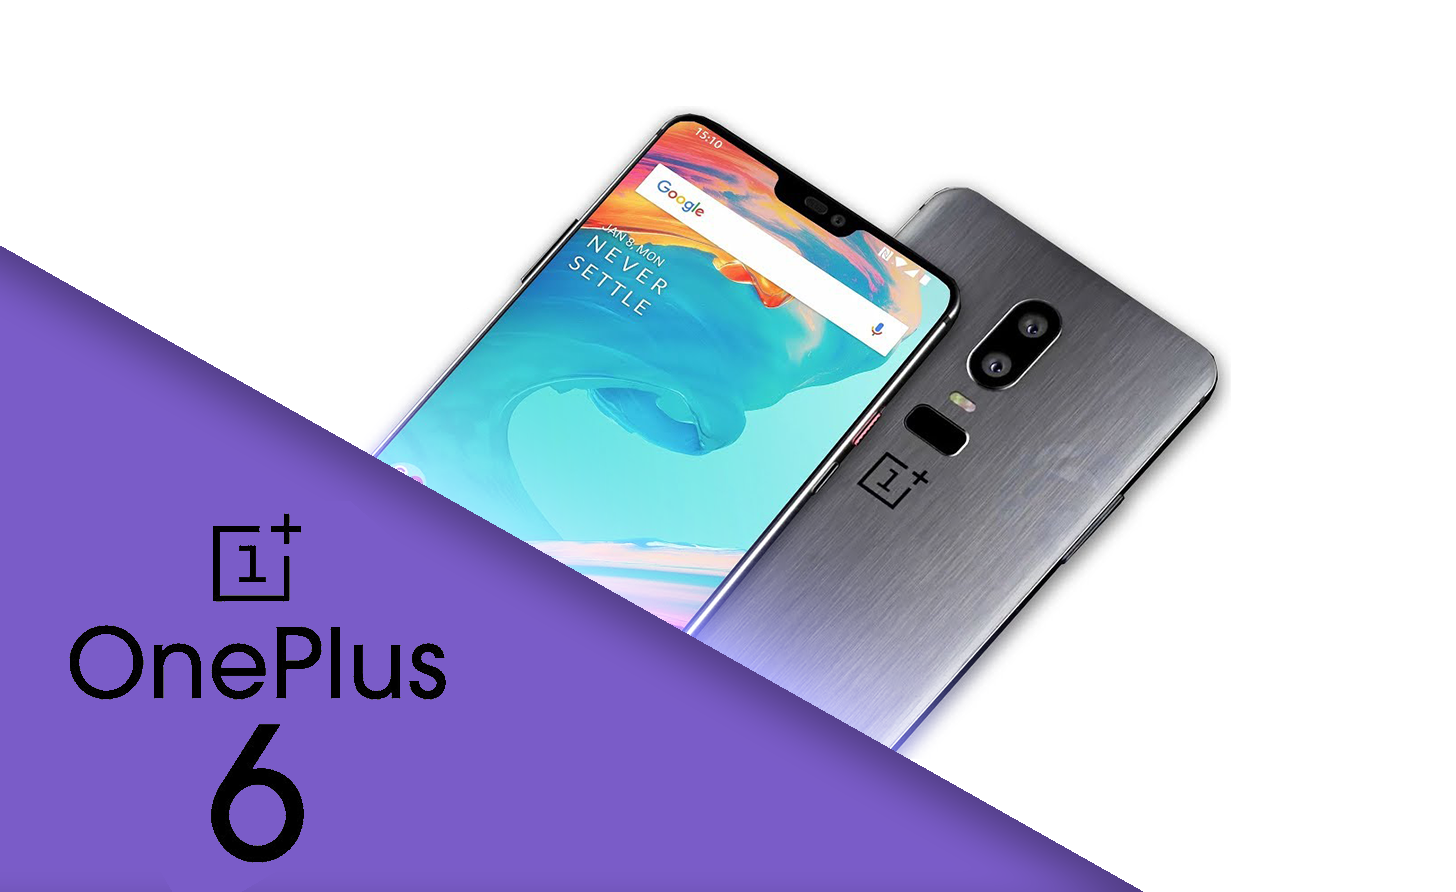 Advantages and disadvantages of the OnePlus 6 smartphone